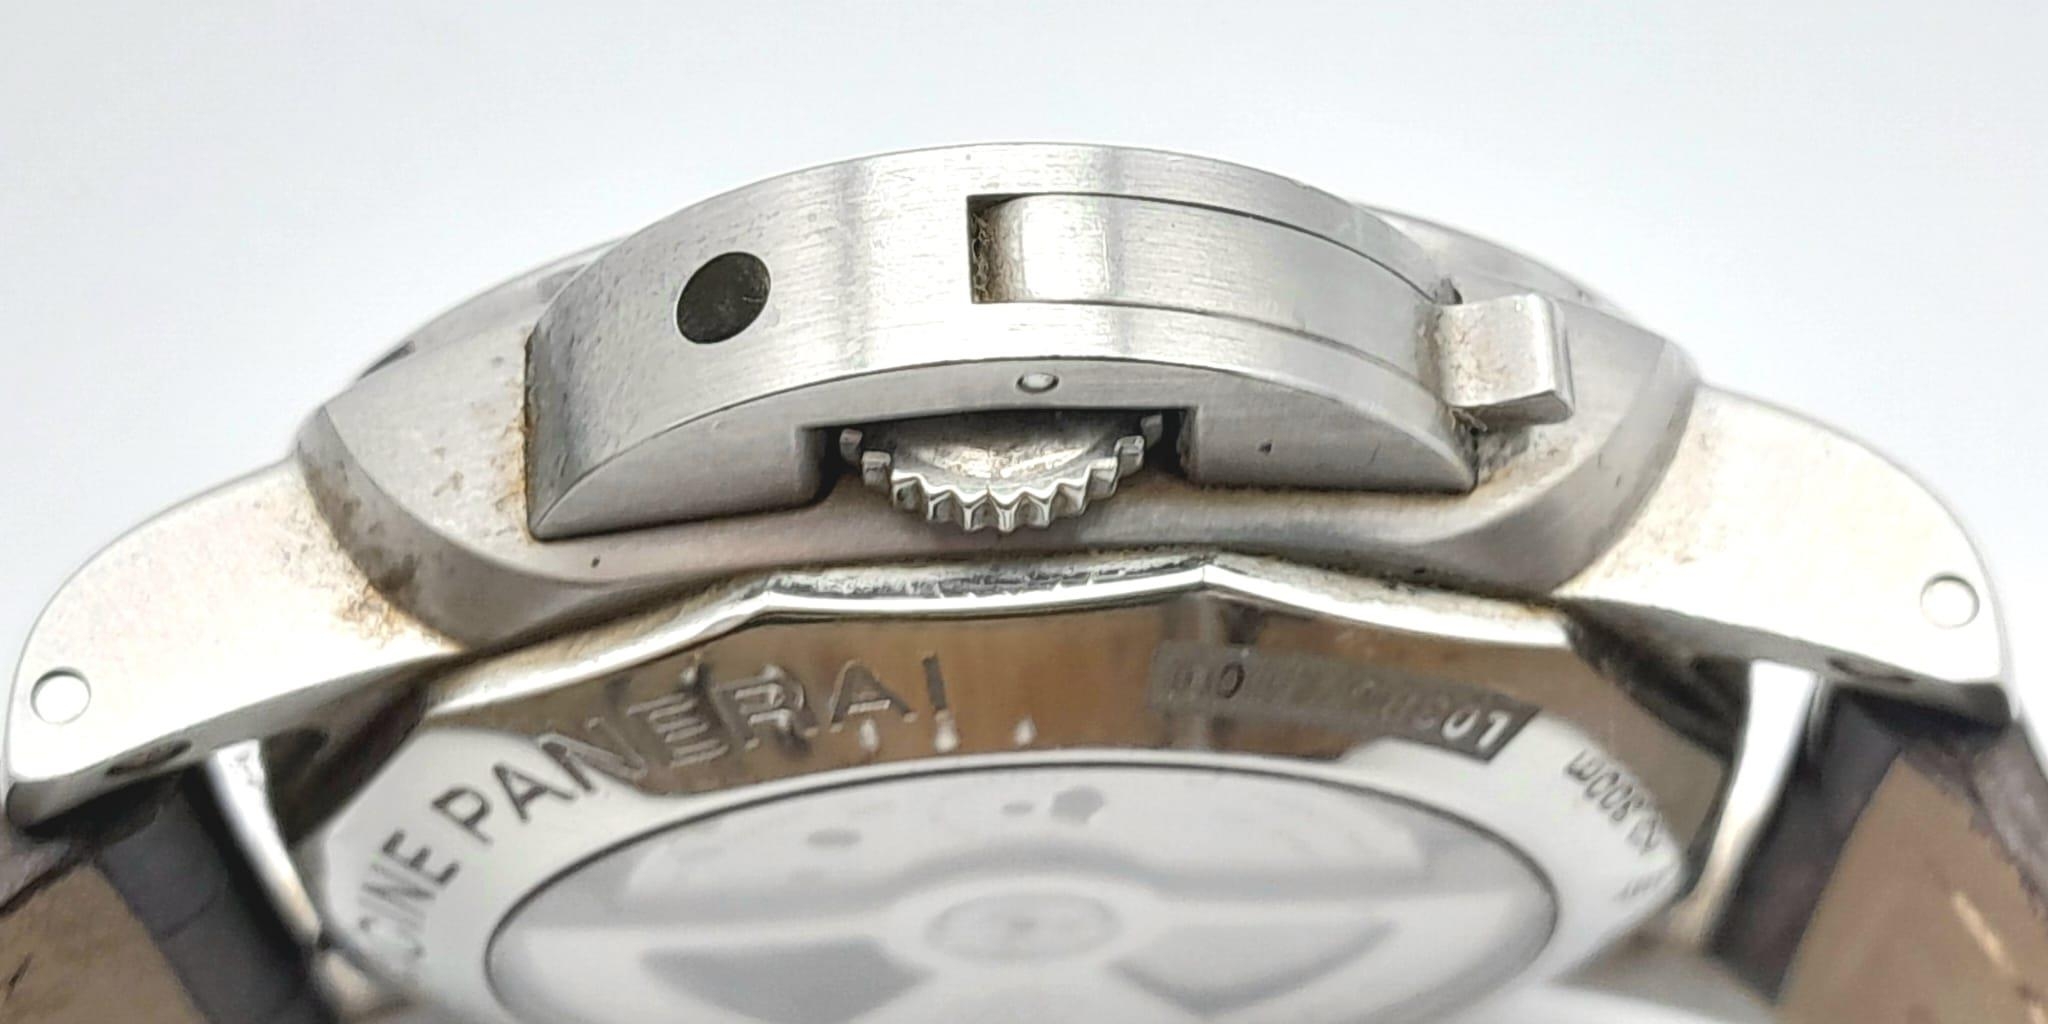 A "PANERAI LUMINOR GMT" WITH SKELETON BACK IN STAINLESS STEEL, A VERY SOUGHT AFTER PRESTIGE WATCH! - Image 8 of 11